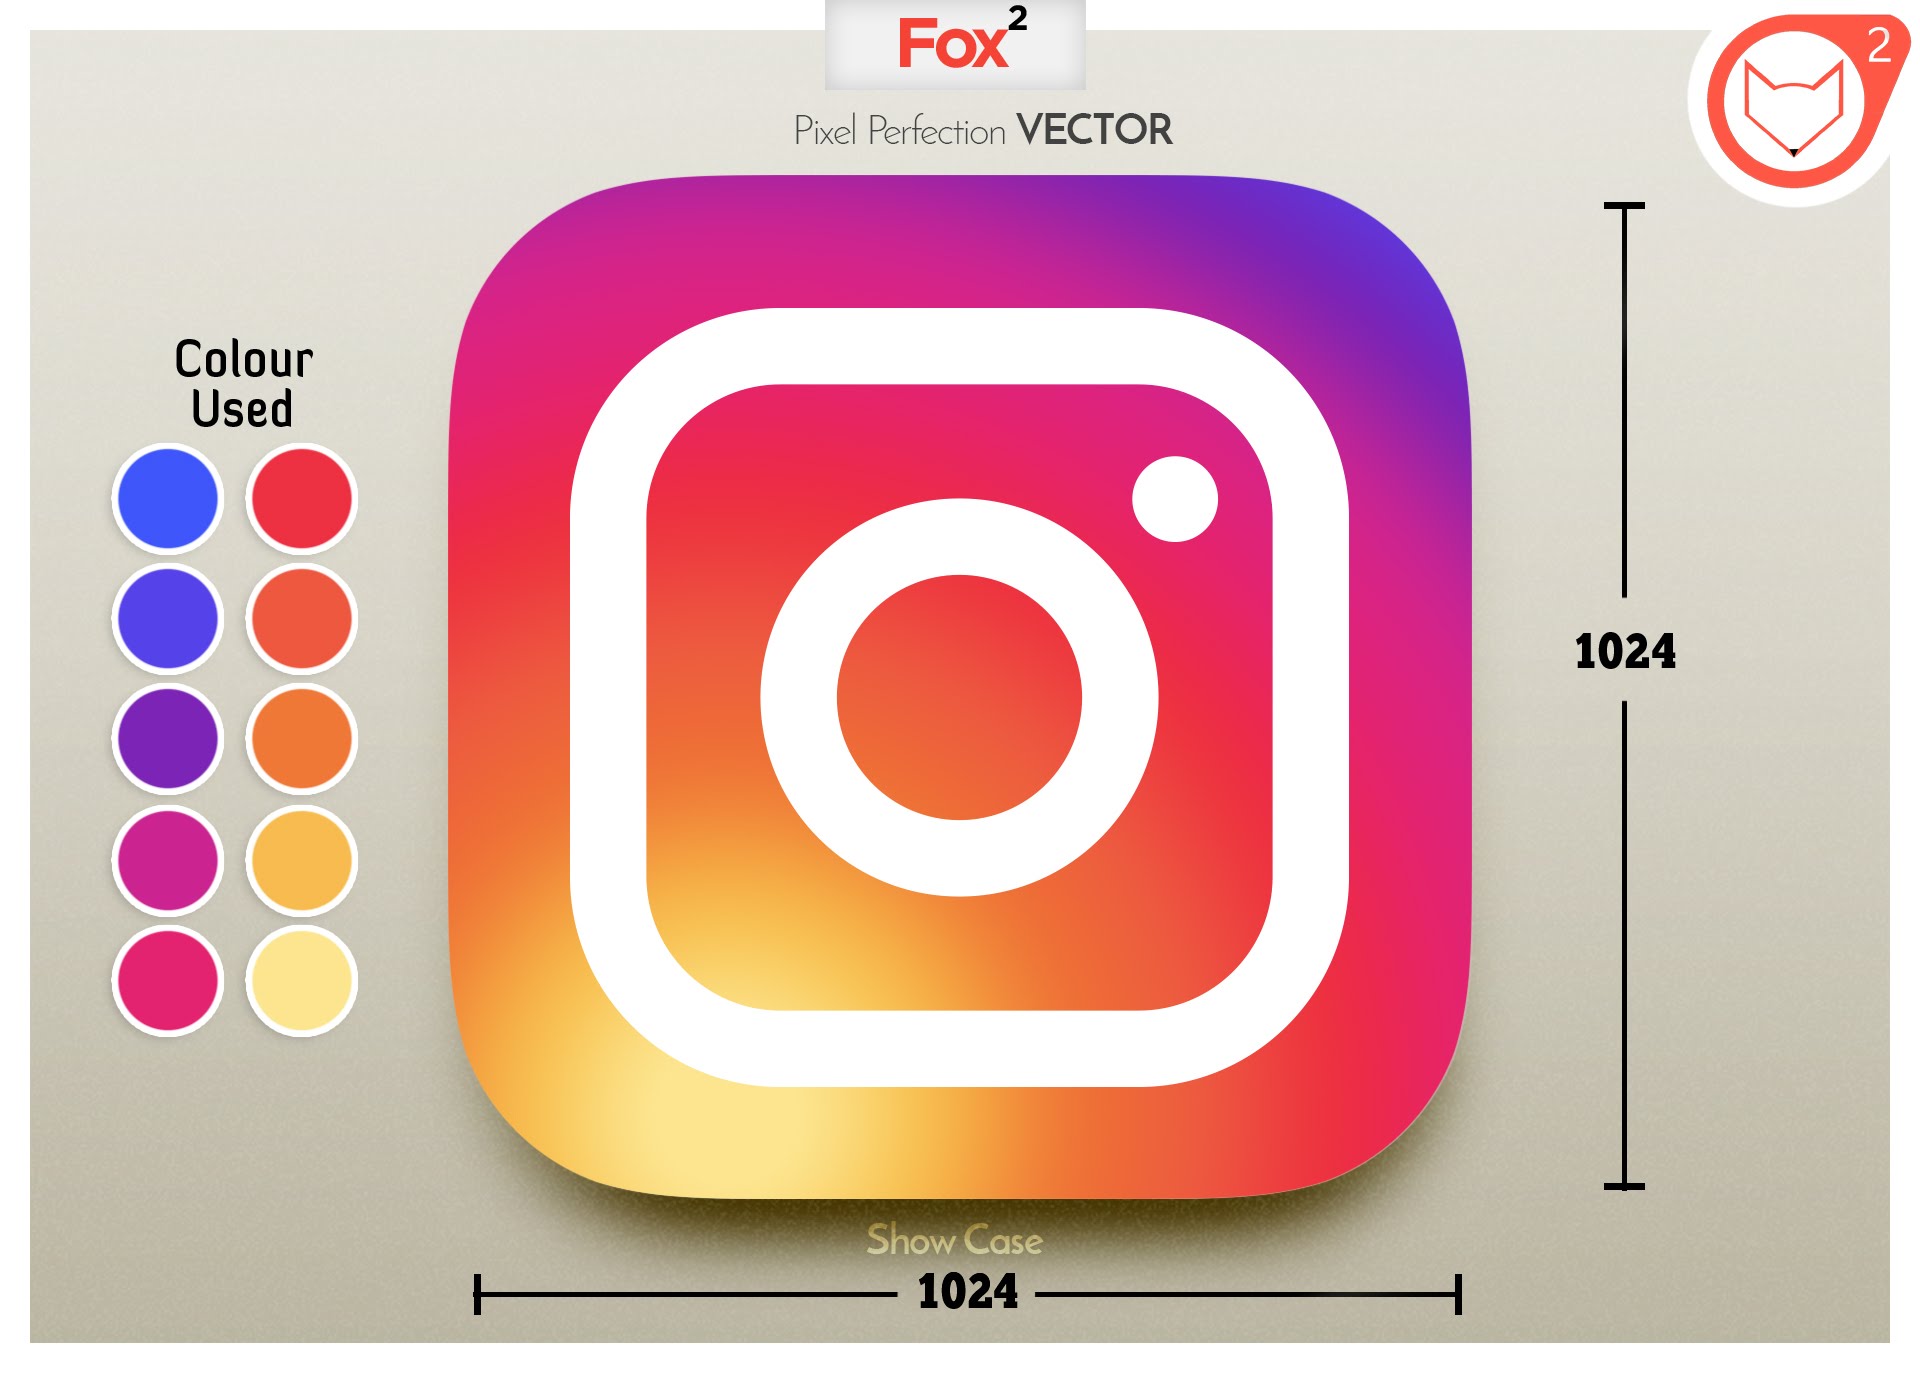 The Internet Freaks Out Over Instagrams New Logo and Layout 